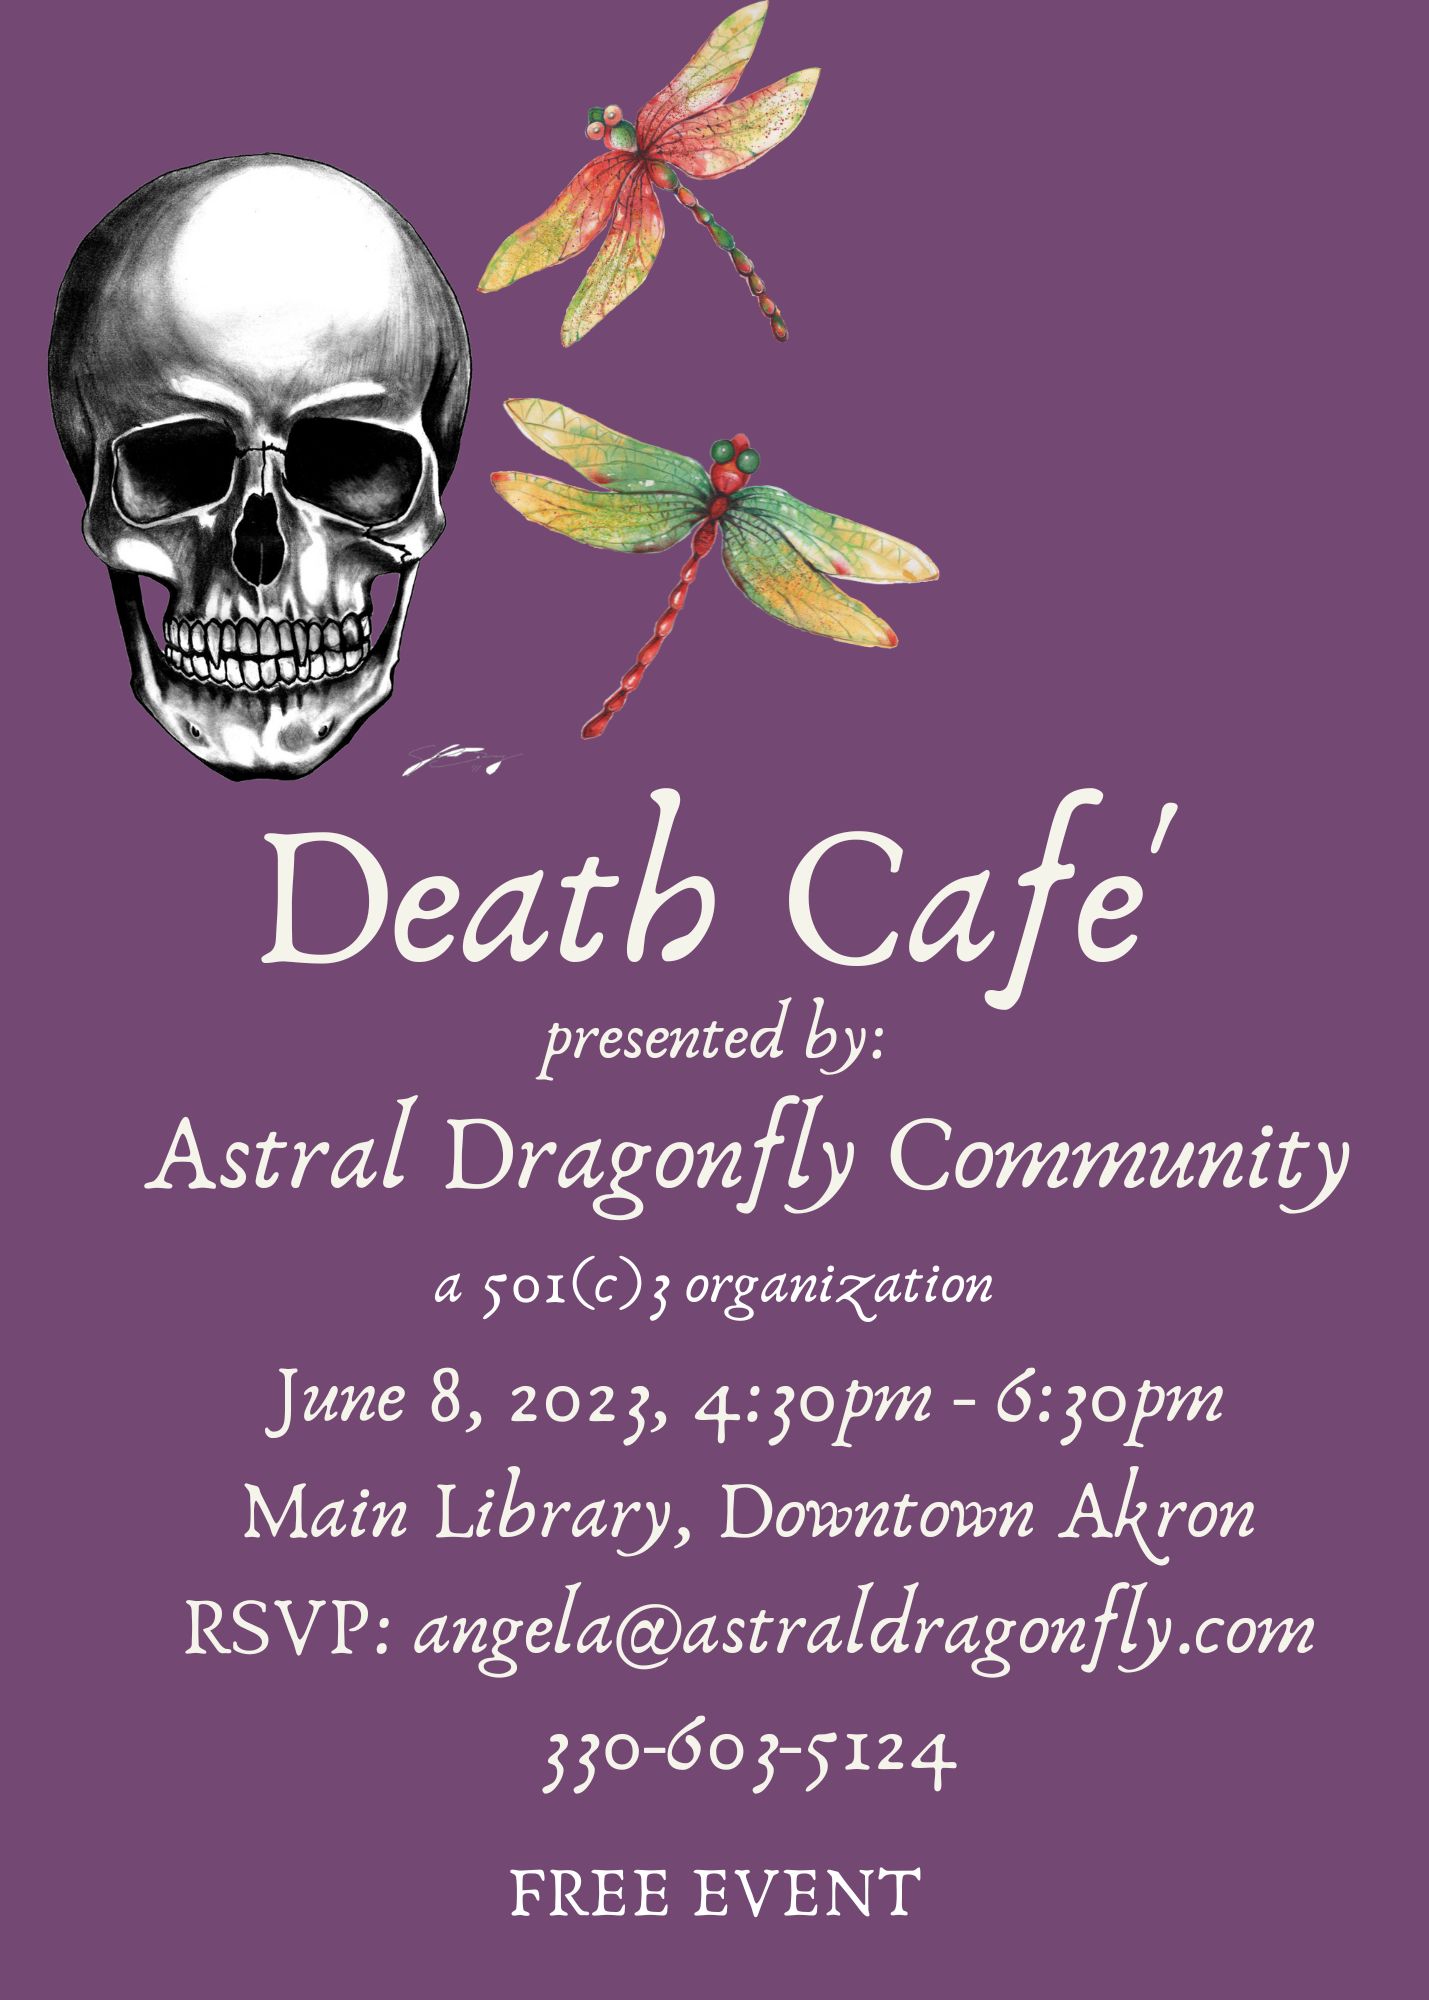 A Death Cafe in Downtown Akron